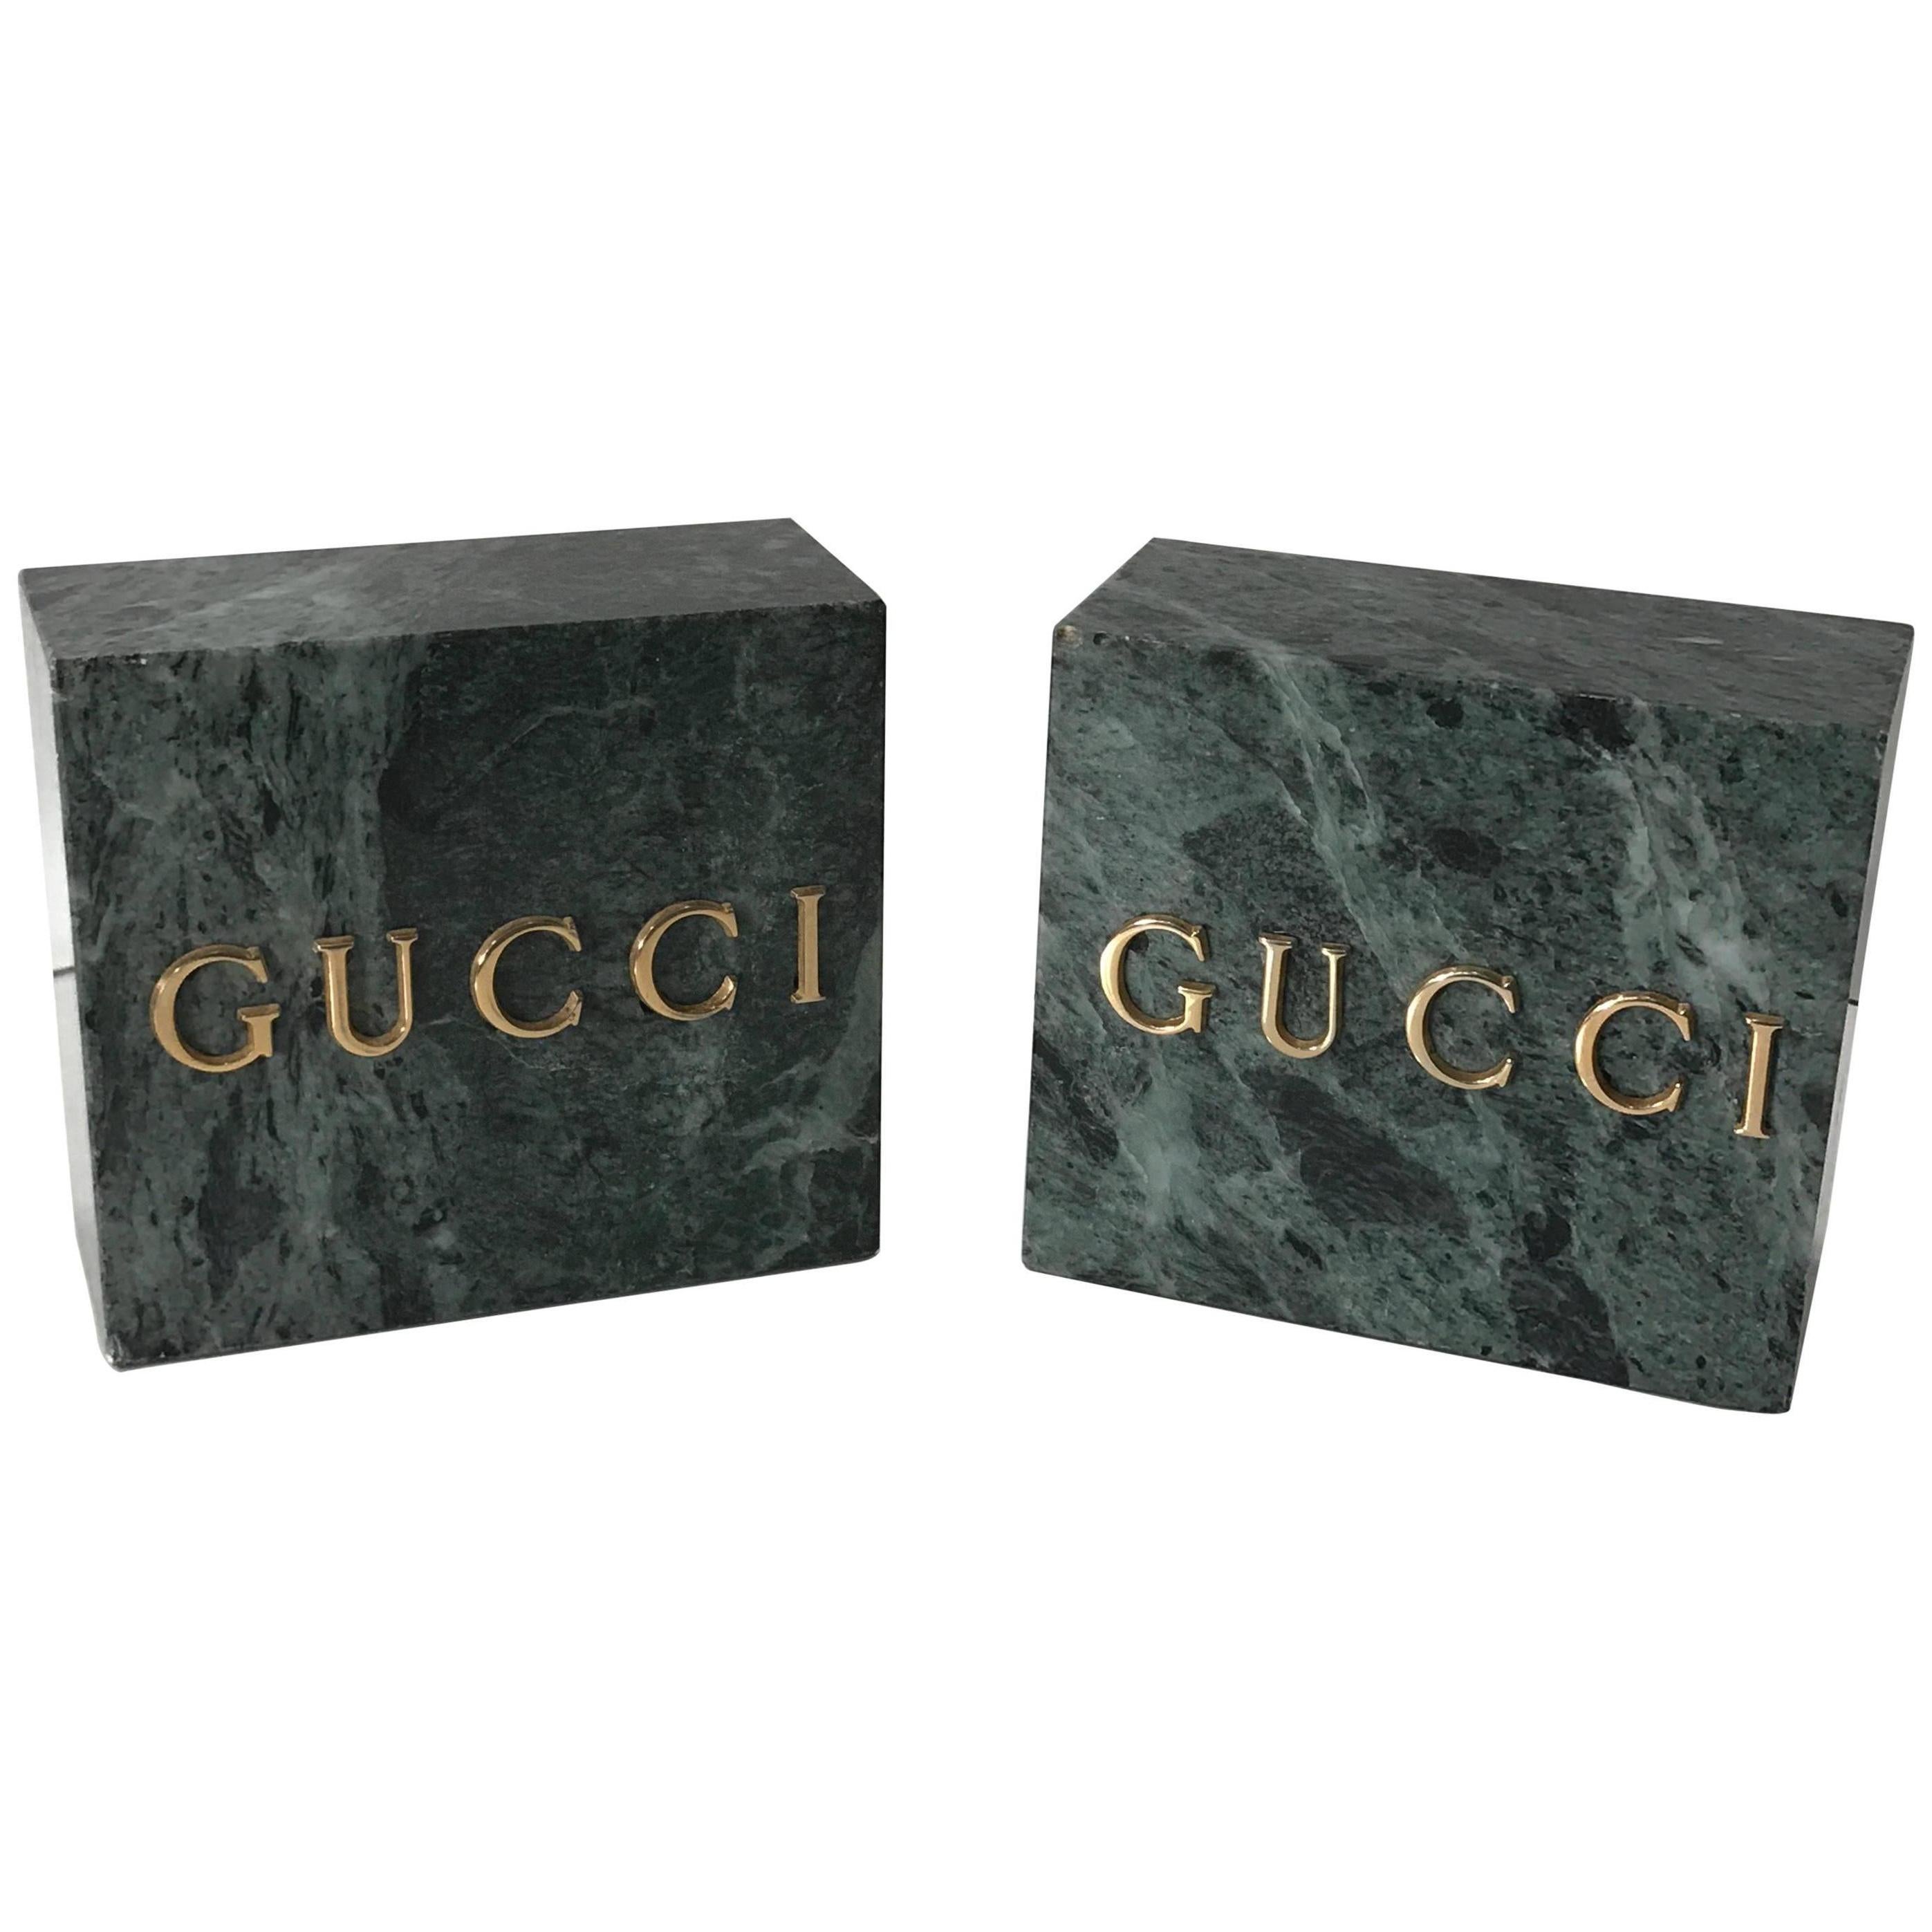 Pair of Gucci Verdigris Marble Bookends